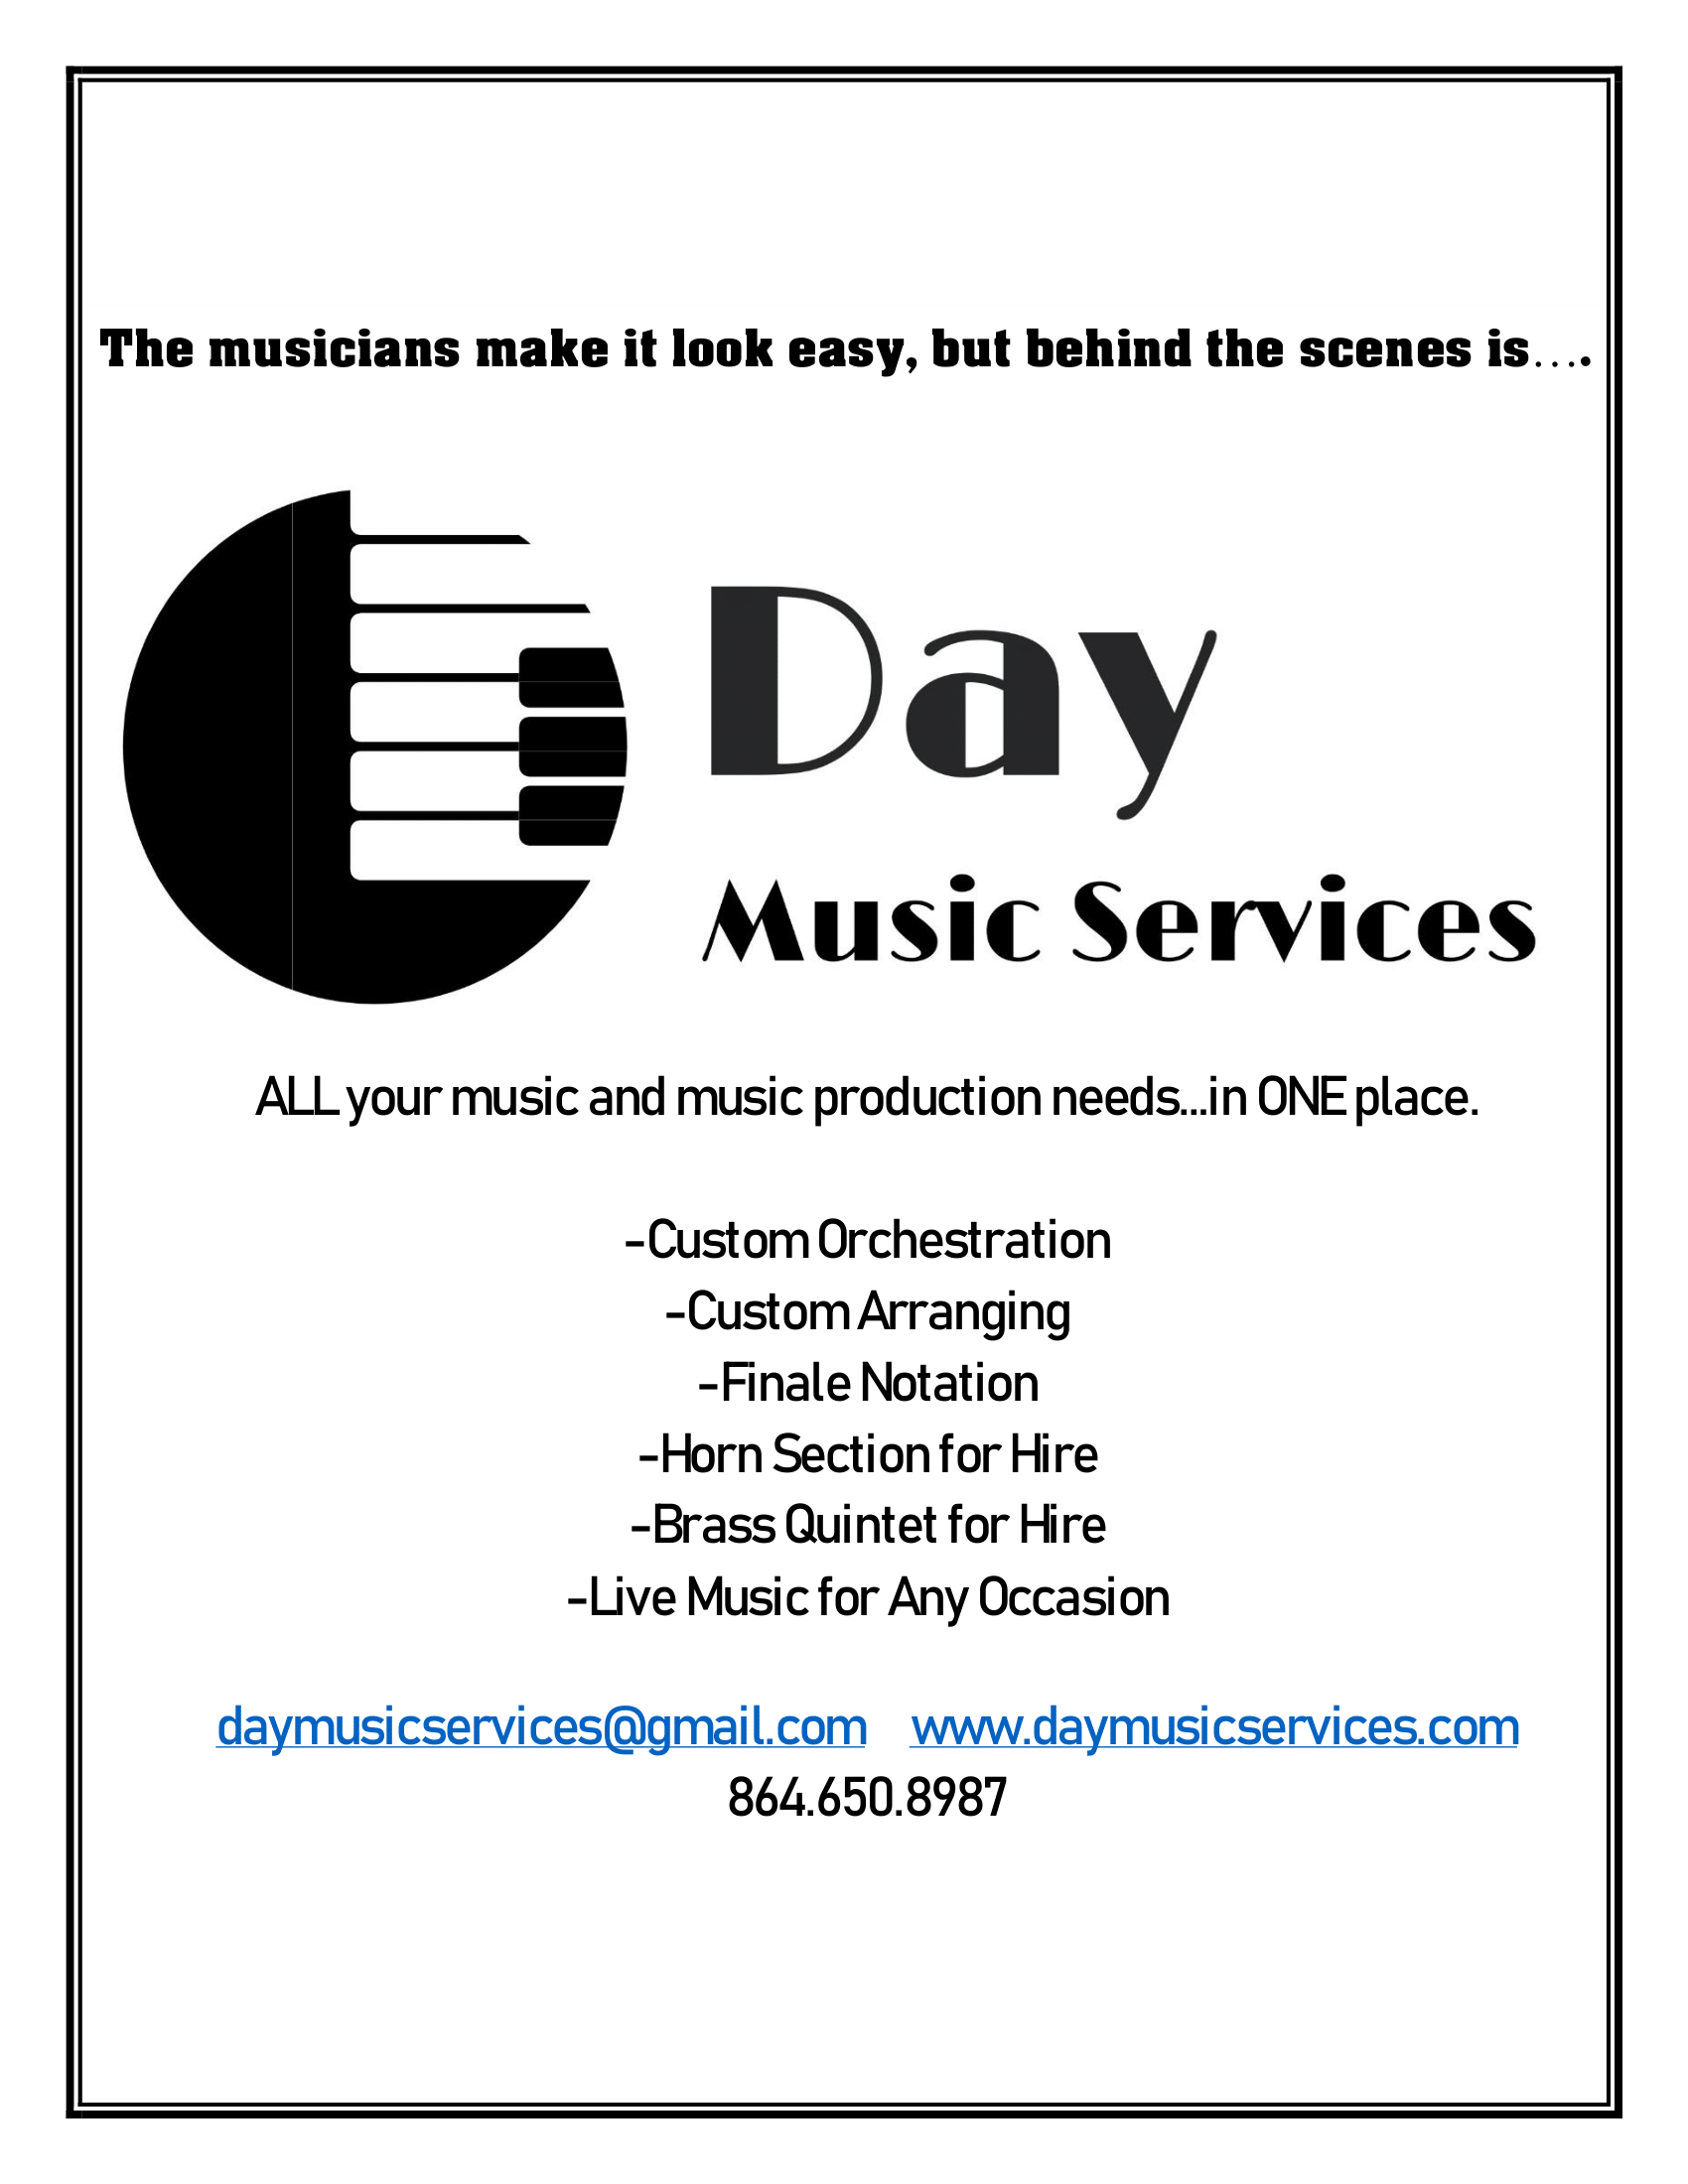 Greg Day Music Services